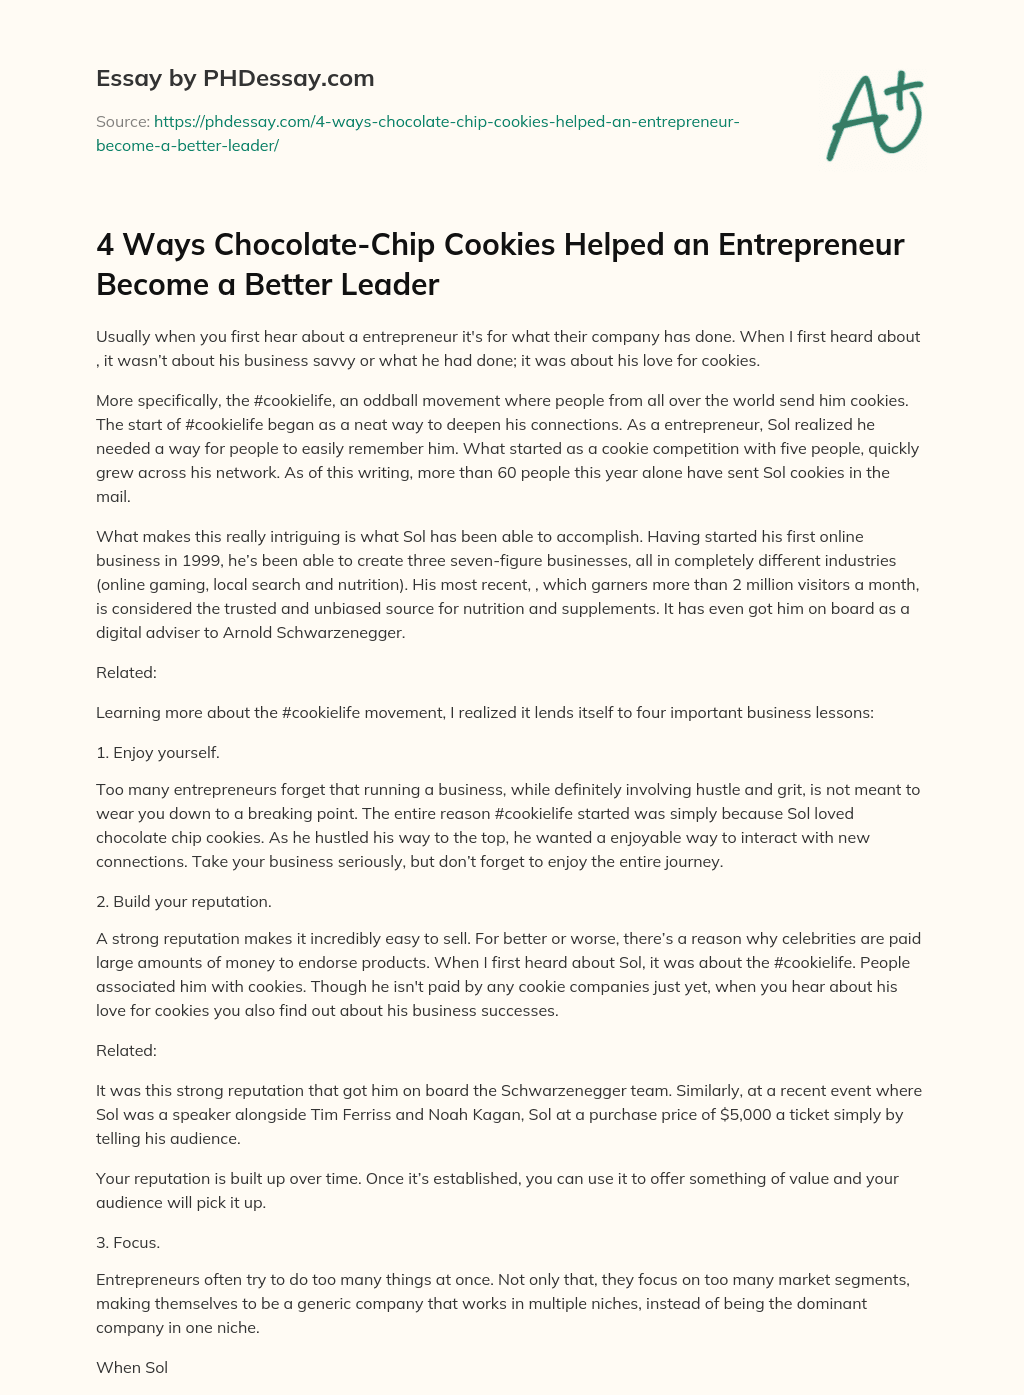 4 Ways Chocolate-Chip Cookies Helped an Entrepreneur Become a Better Leader essay